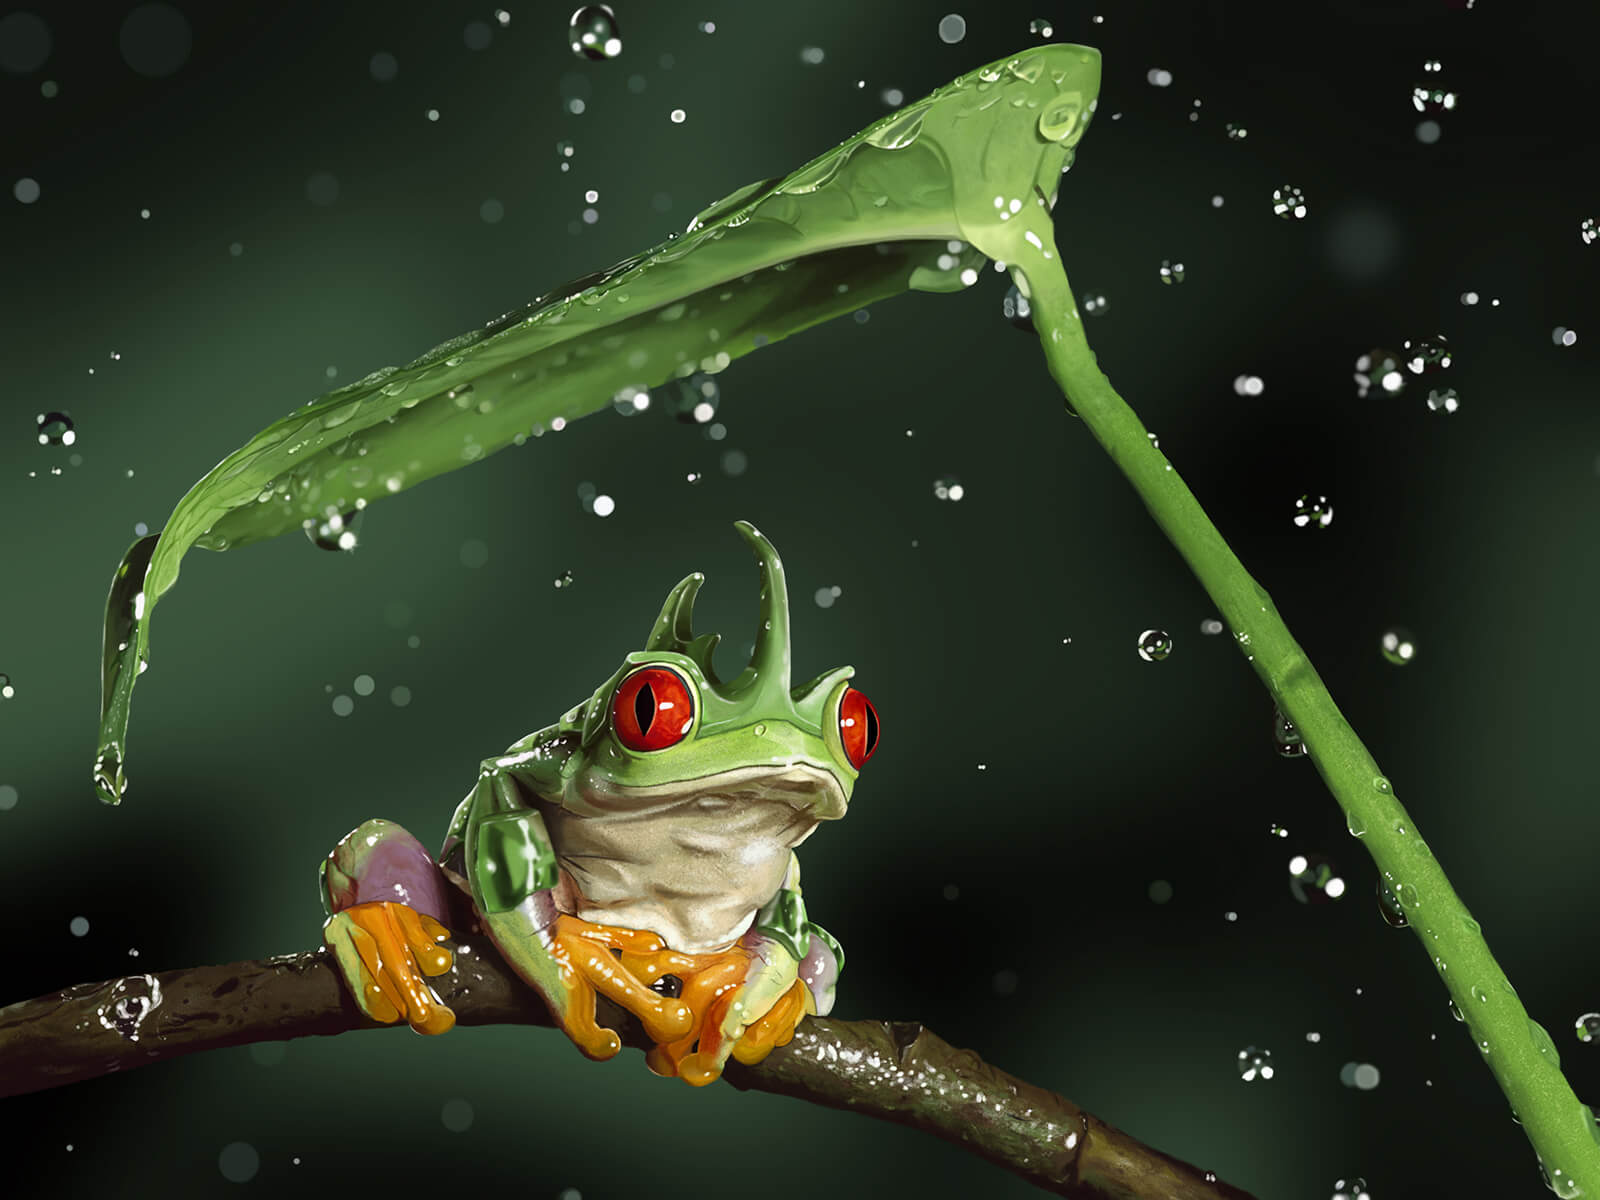 A red-eyed, green-horned tropical frog sits on a branch as a leaf shields it from relatively massive falling raindrops.